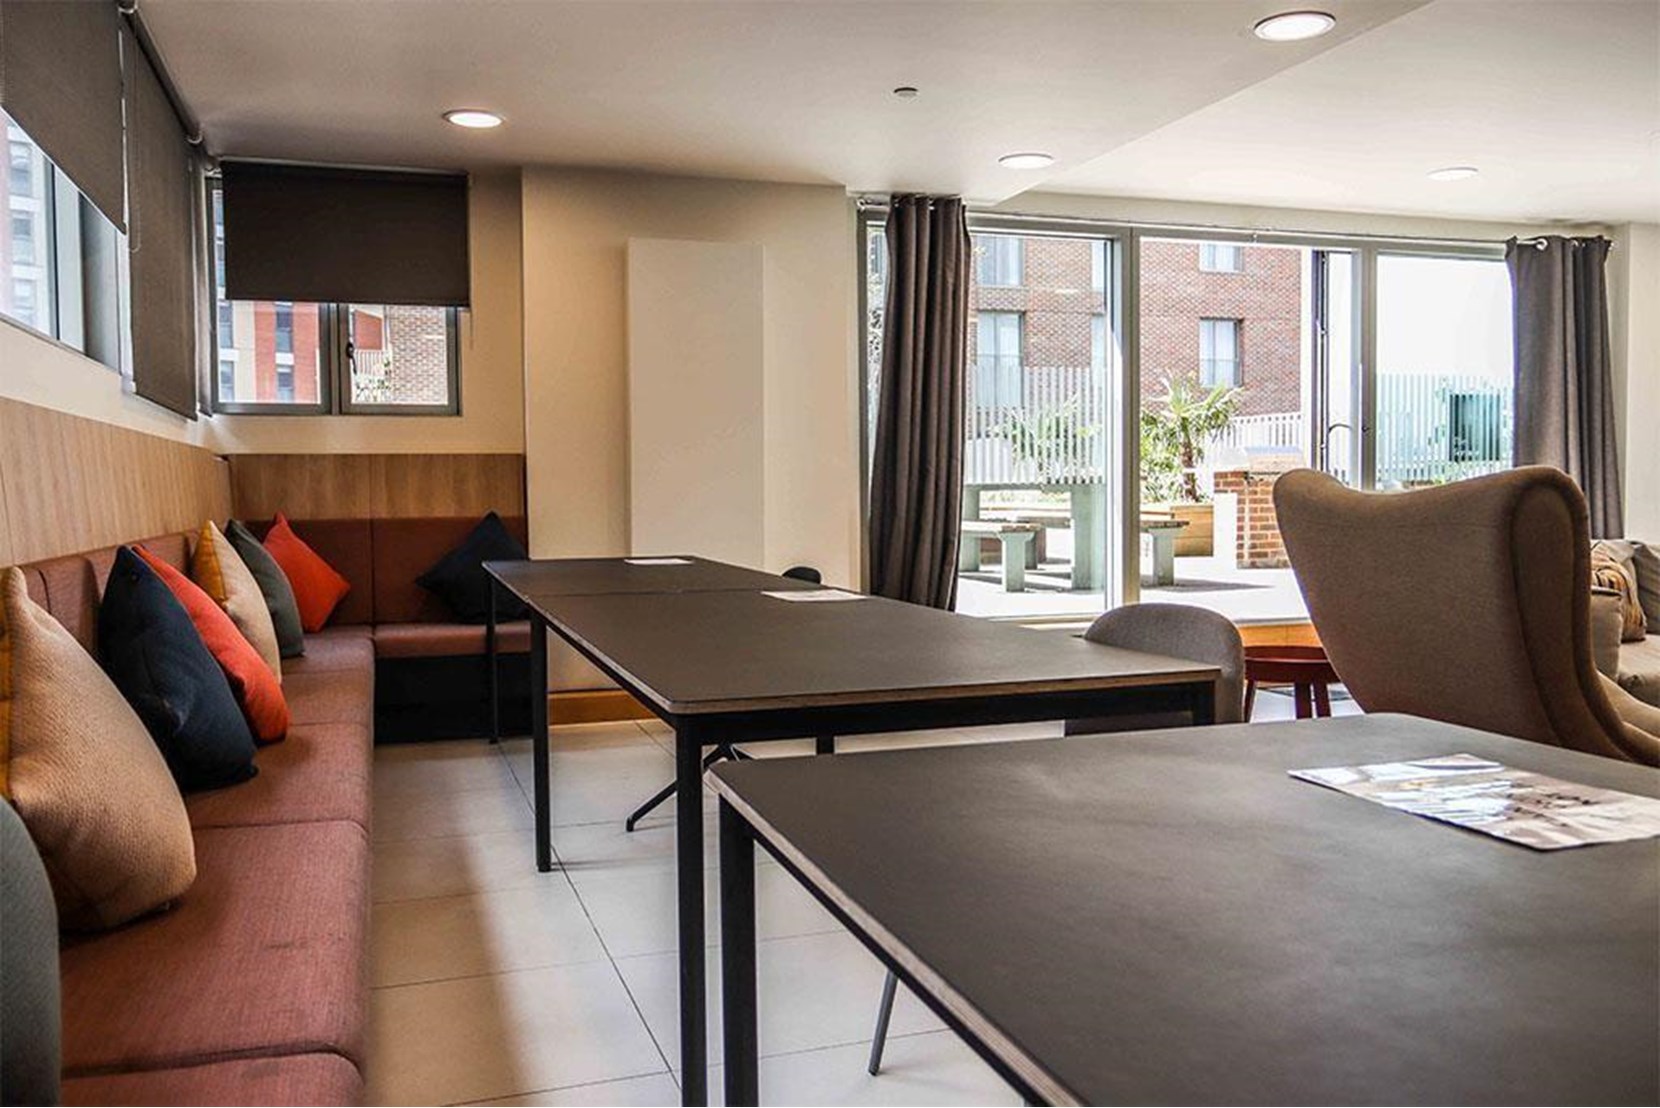 Apartments to Rent by Savills at Rehearsal Rooms, Ealing, W3, communal lounge